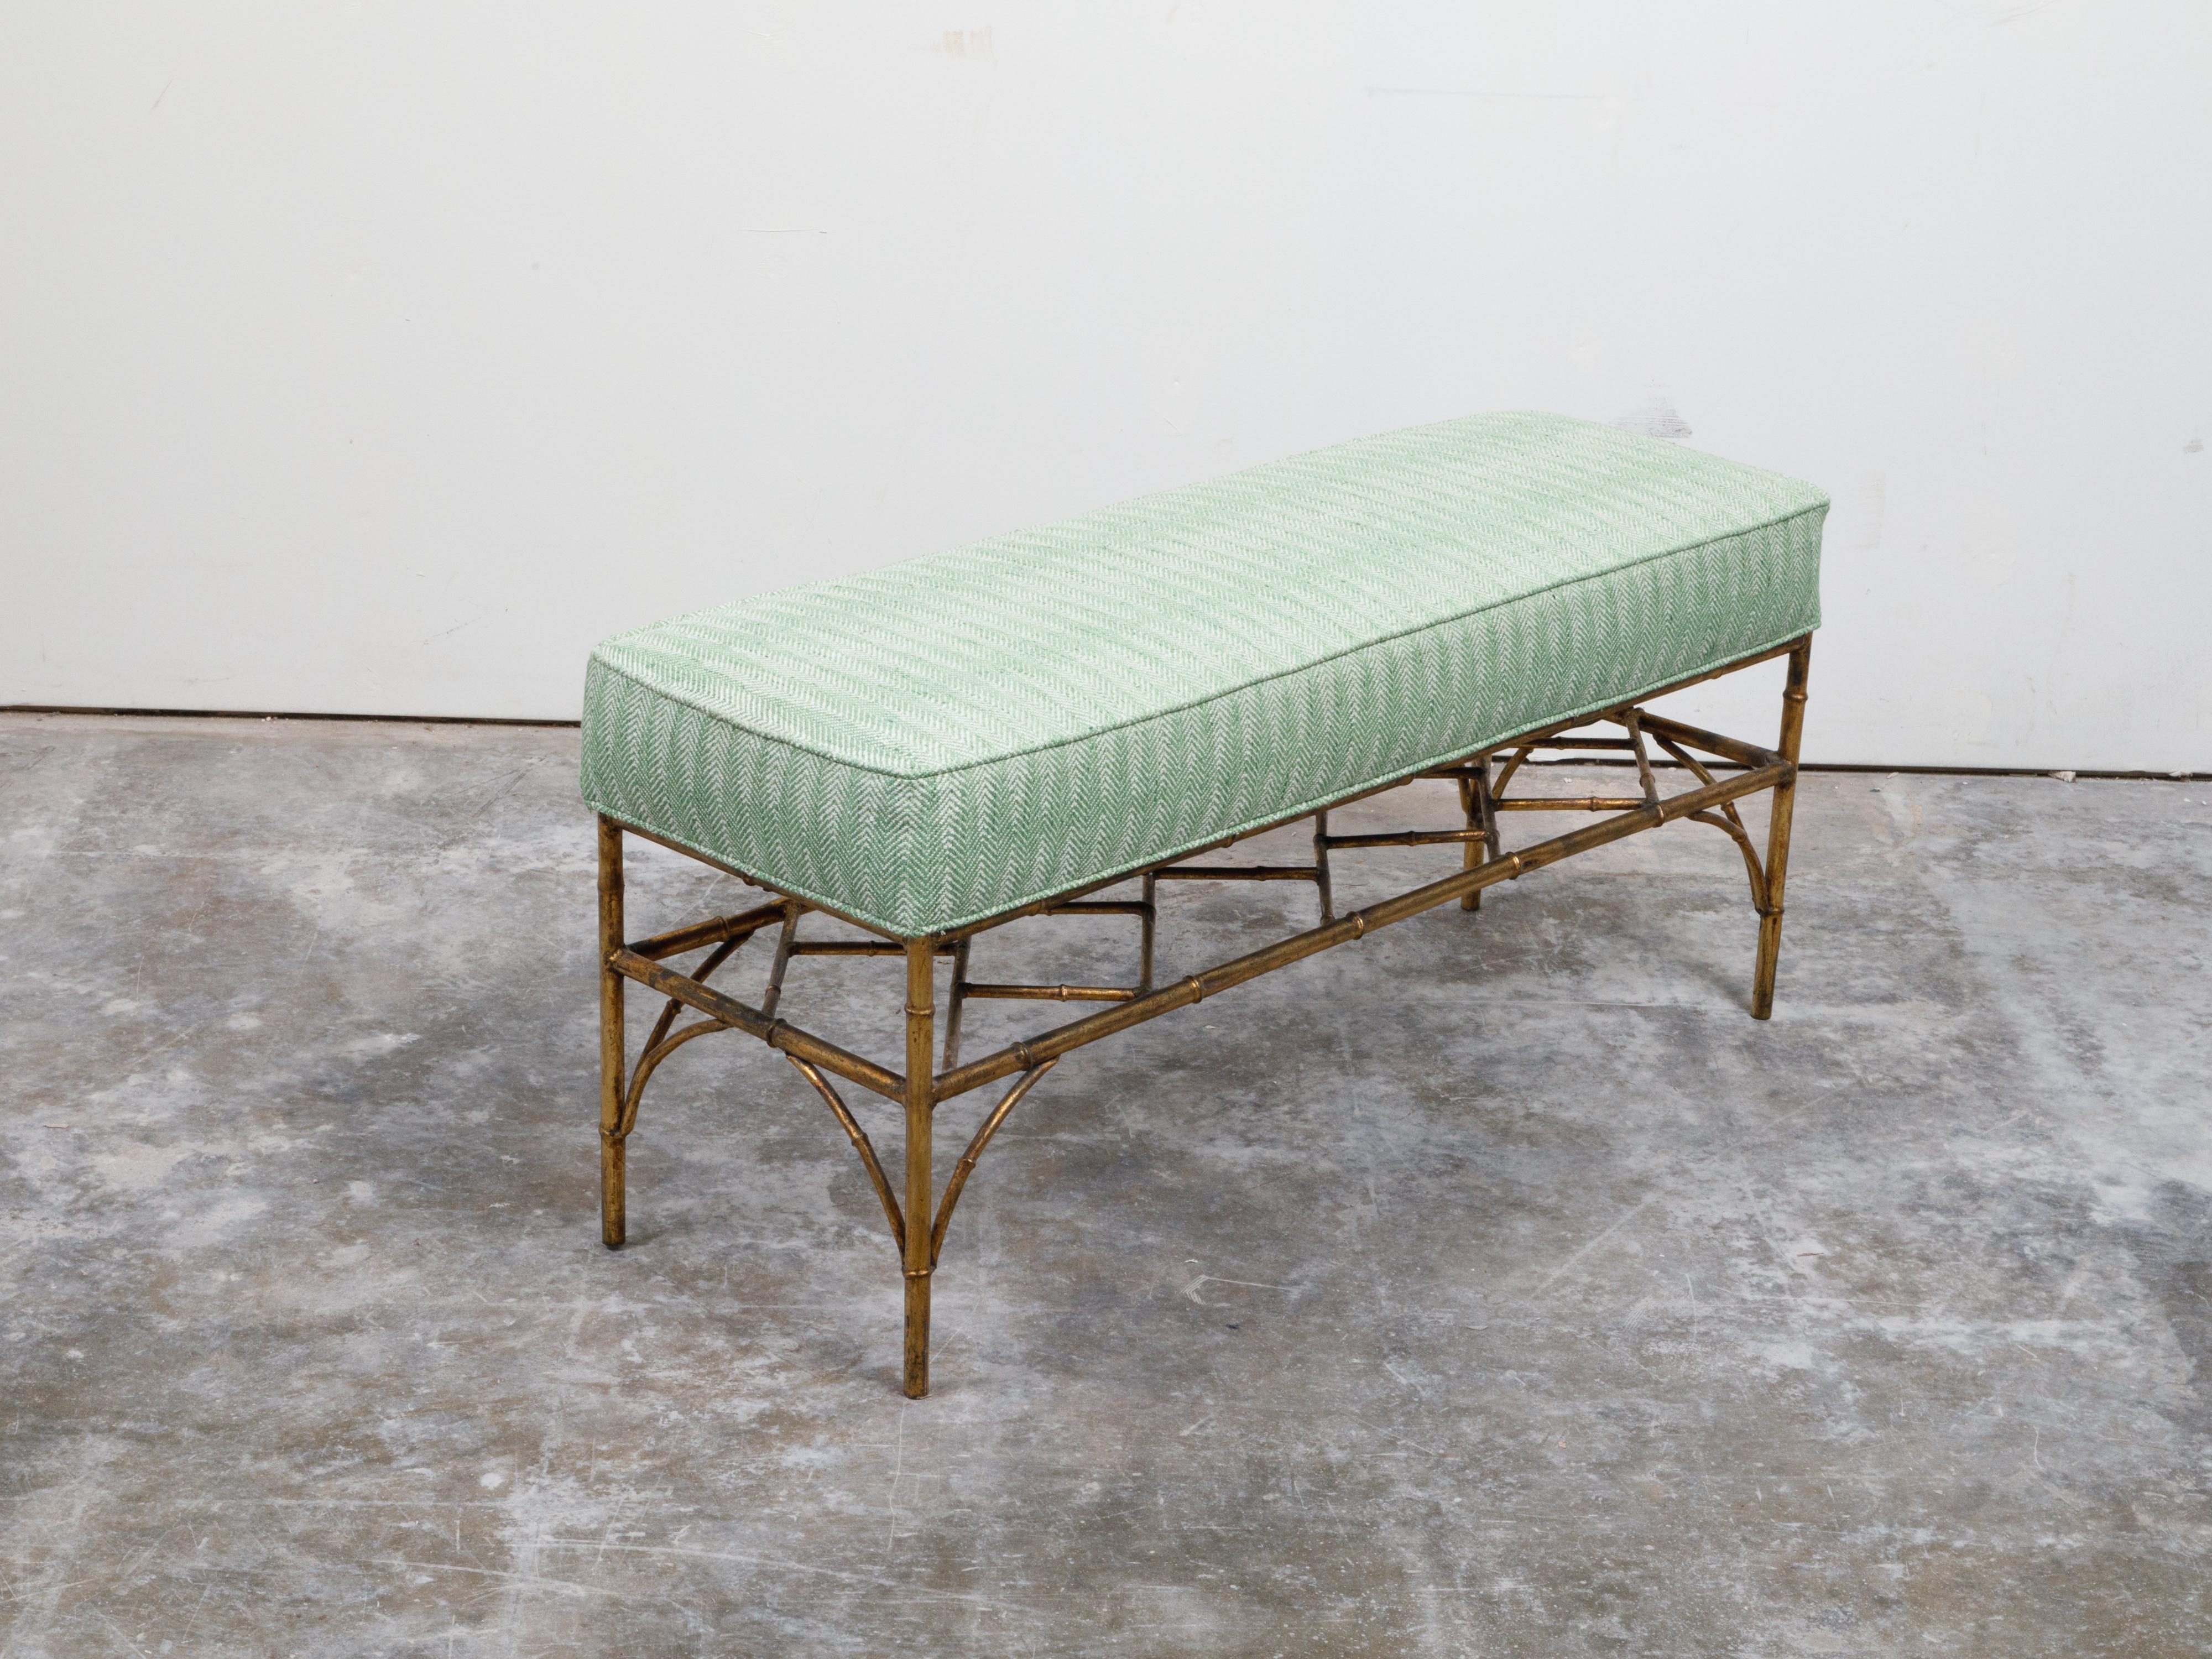 Italian Midcentury Gilt Metal Faux Bamboo Bench with Green Upholstered Seat For Sale 3